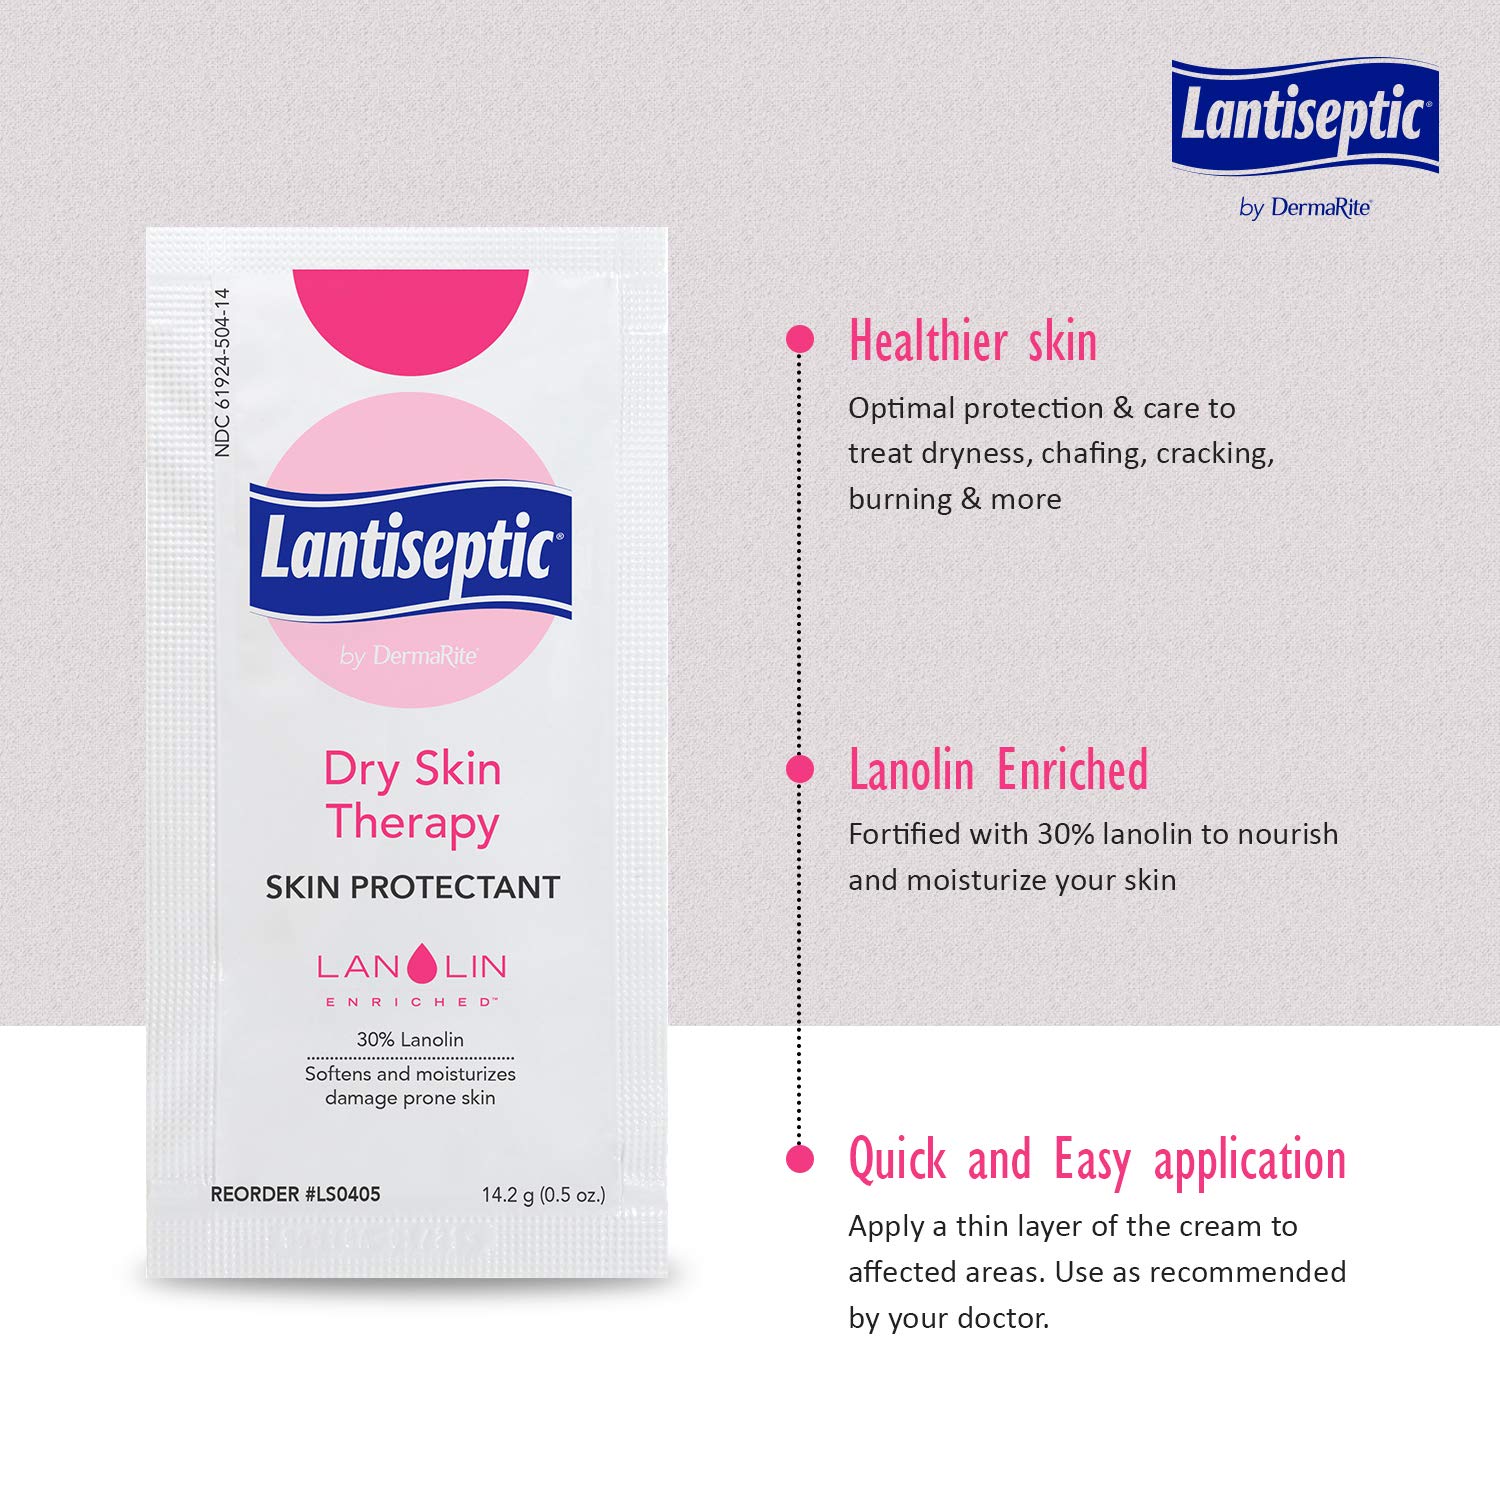 Lantiseptic Daily Dry Skin Protectant Cream - Moisturizes and Protects Cracked, Damaged and Irritated Skin - 30% Lanolin Moisture Barrier Ointment